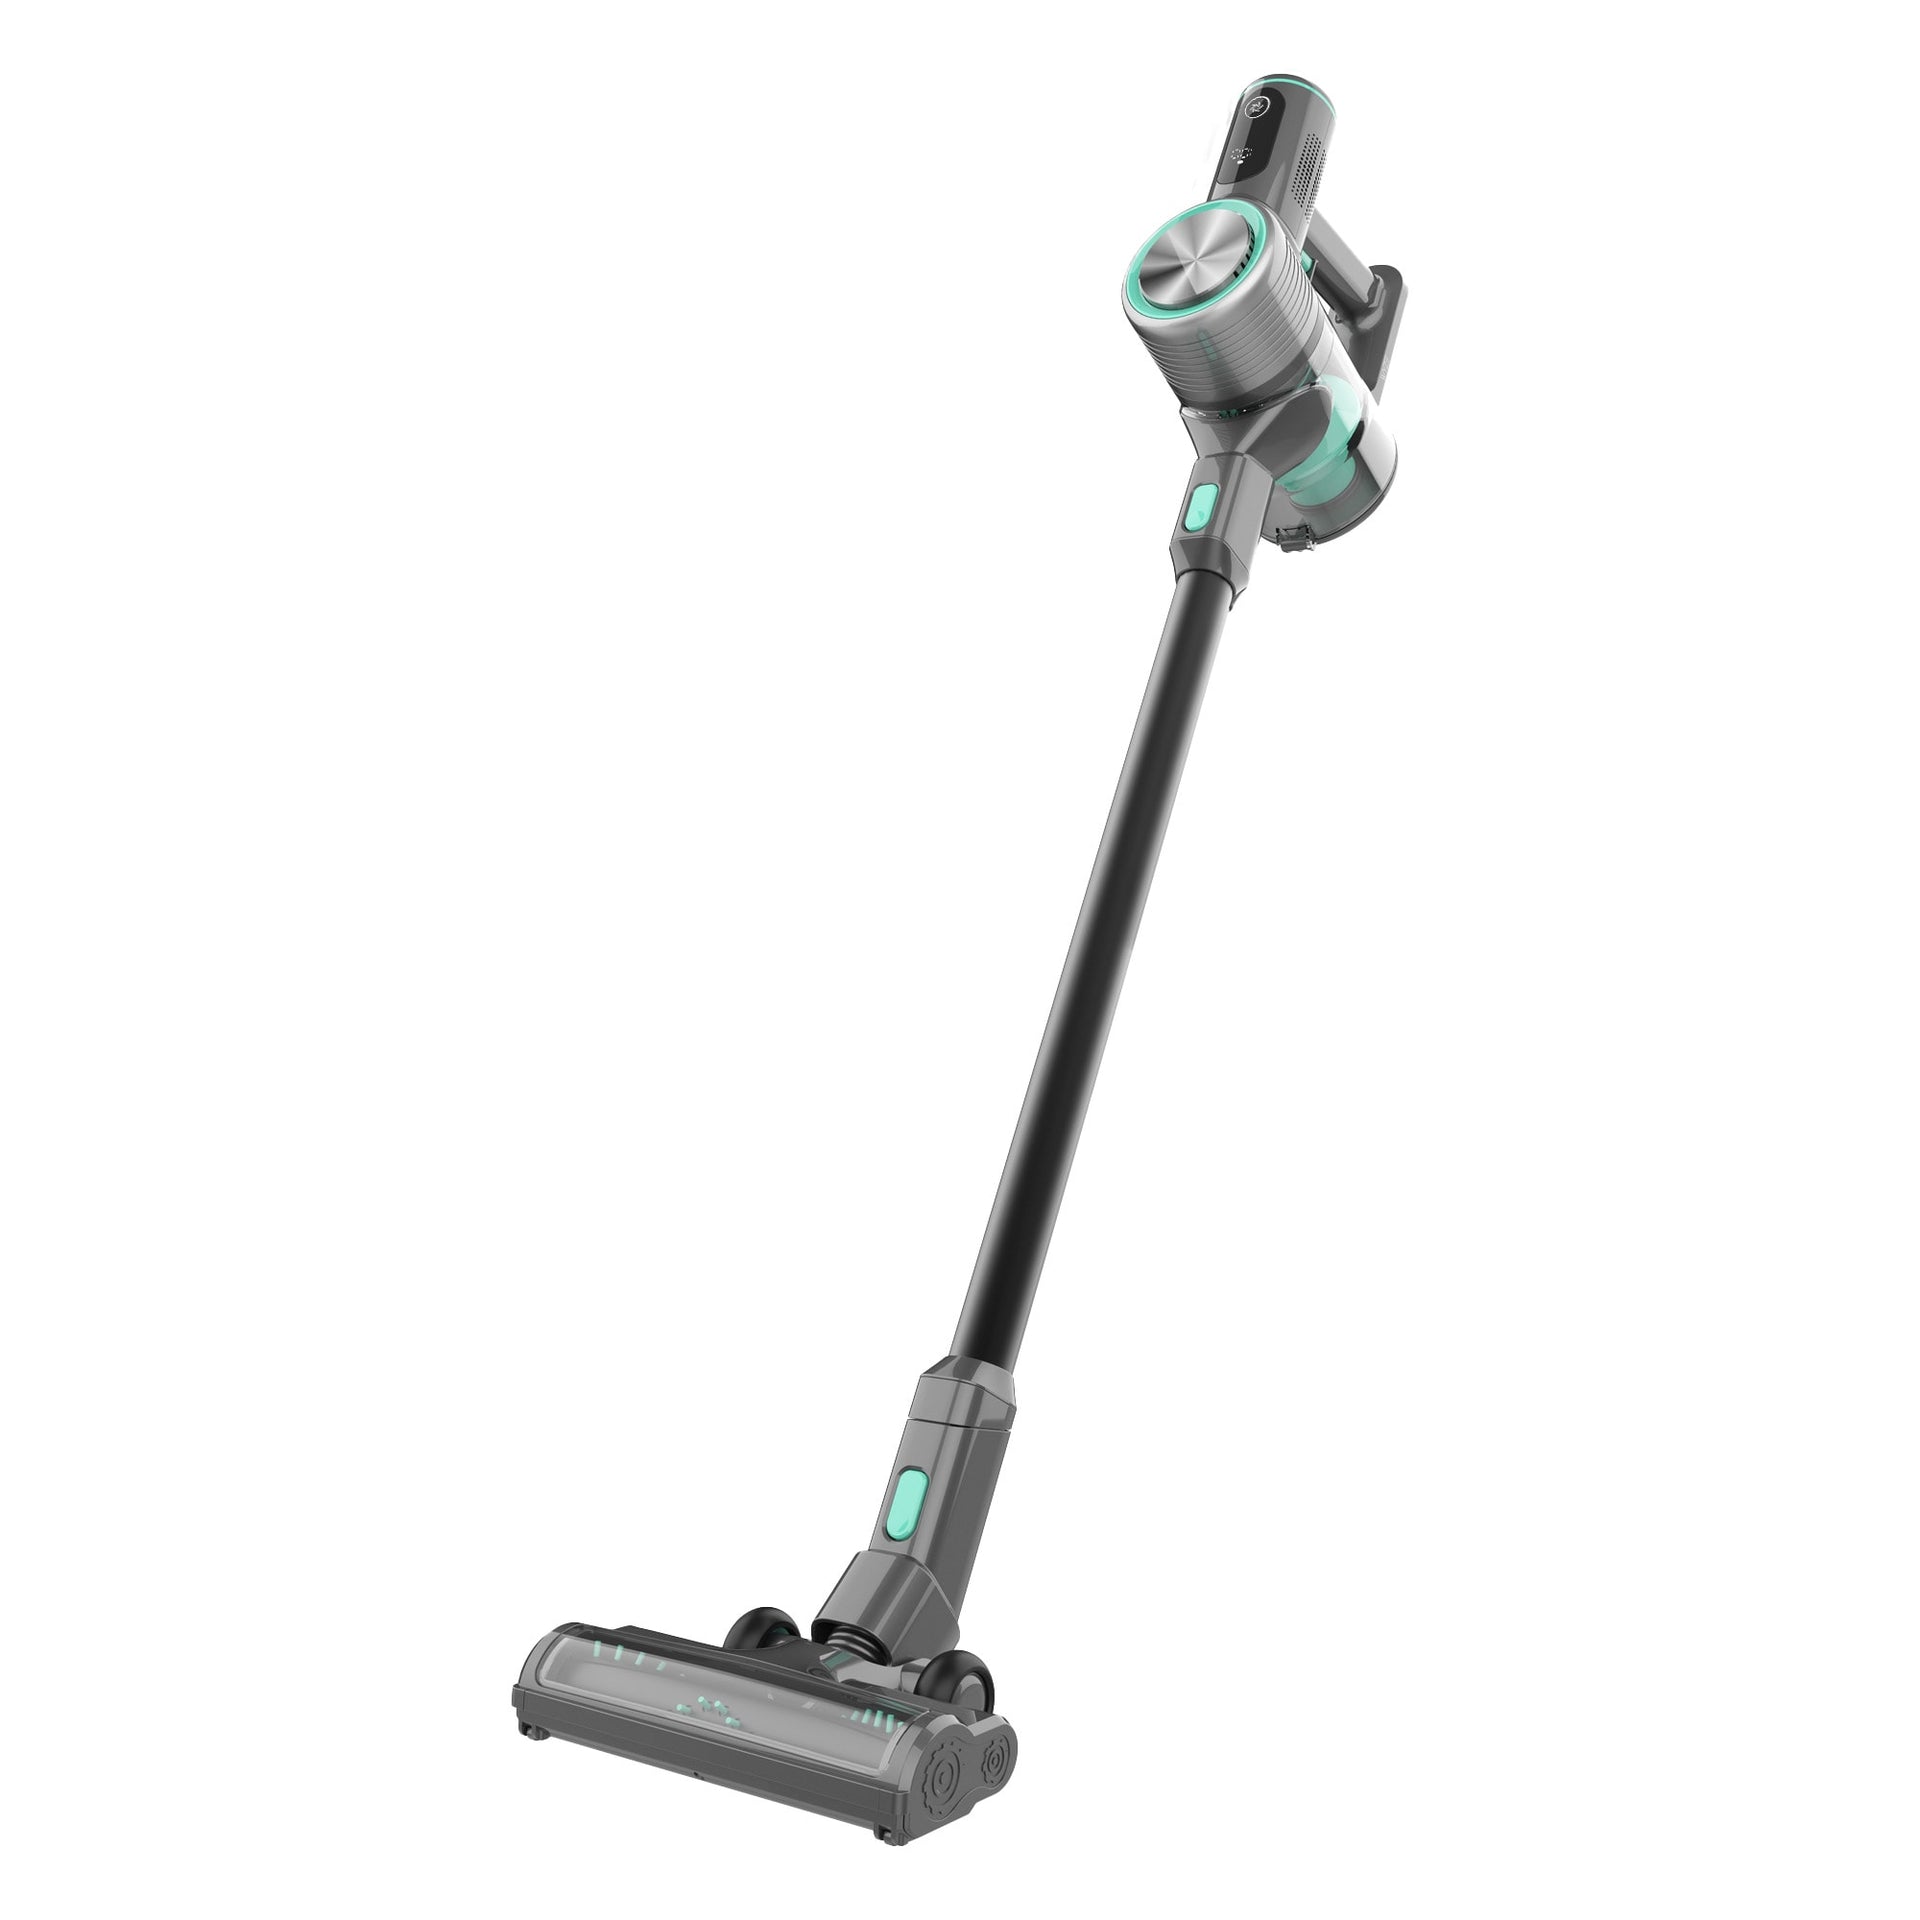 Wyze Cordless Vacuum S  A Stick Vacuum That's Portable and